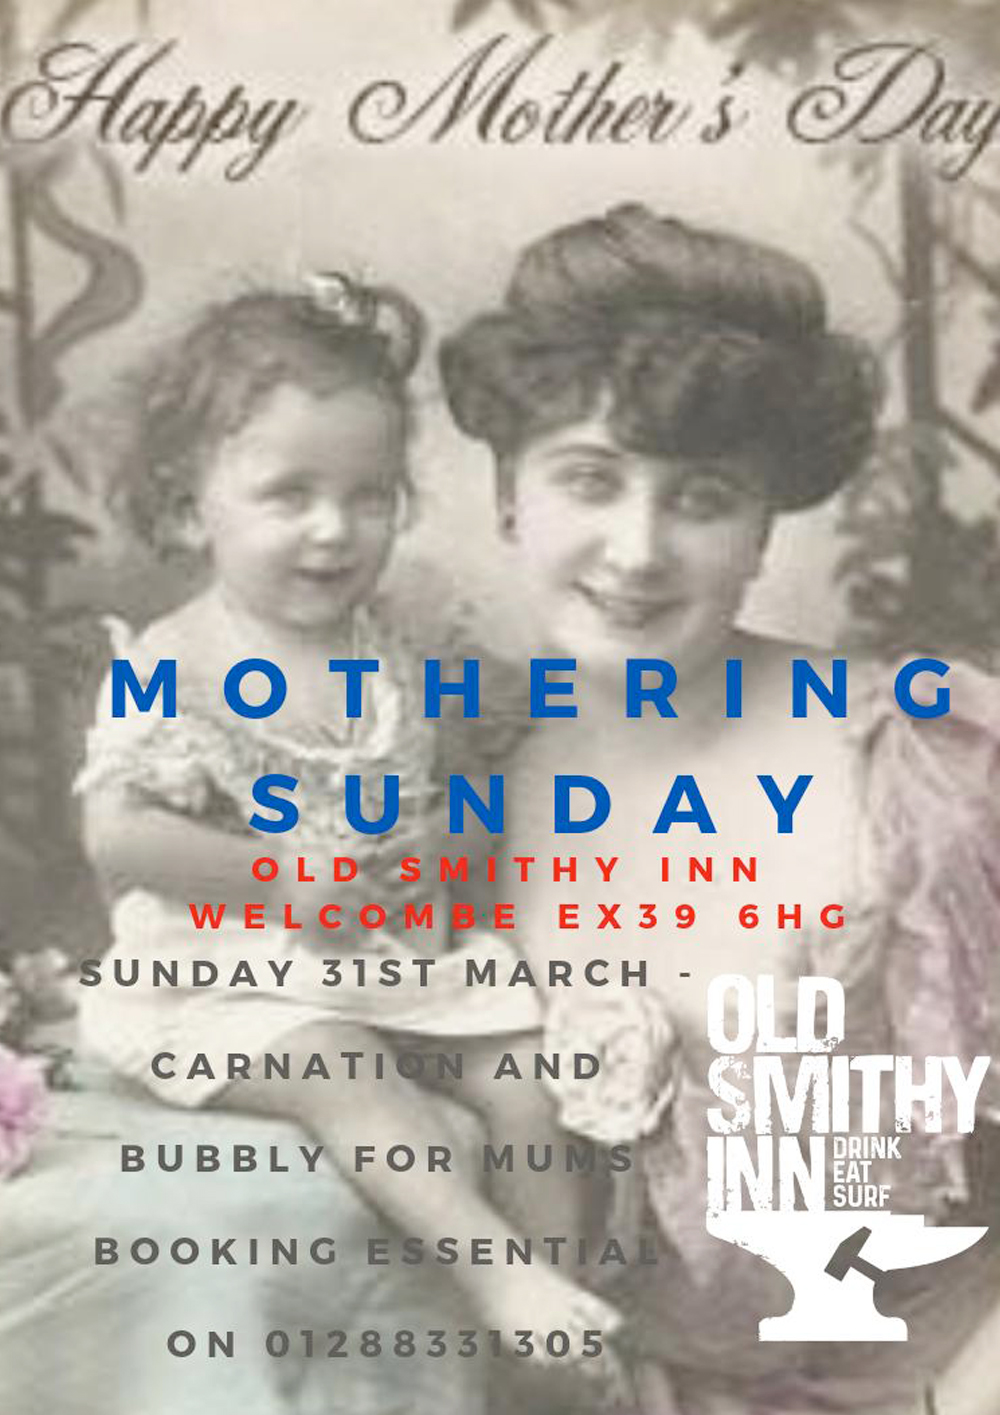 Events | The Old Smithy Inn